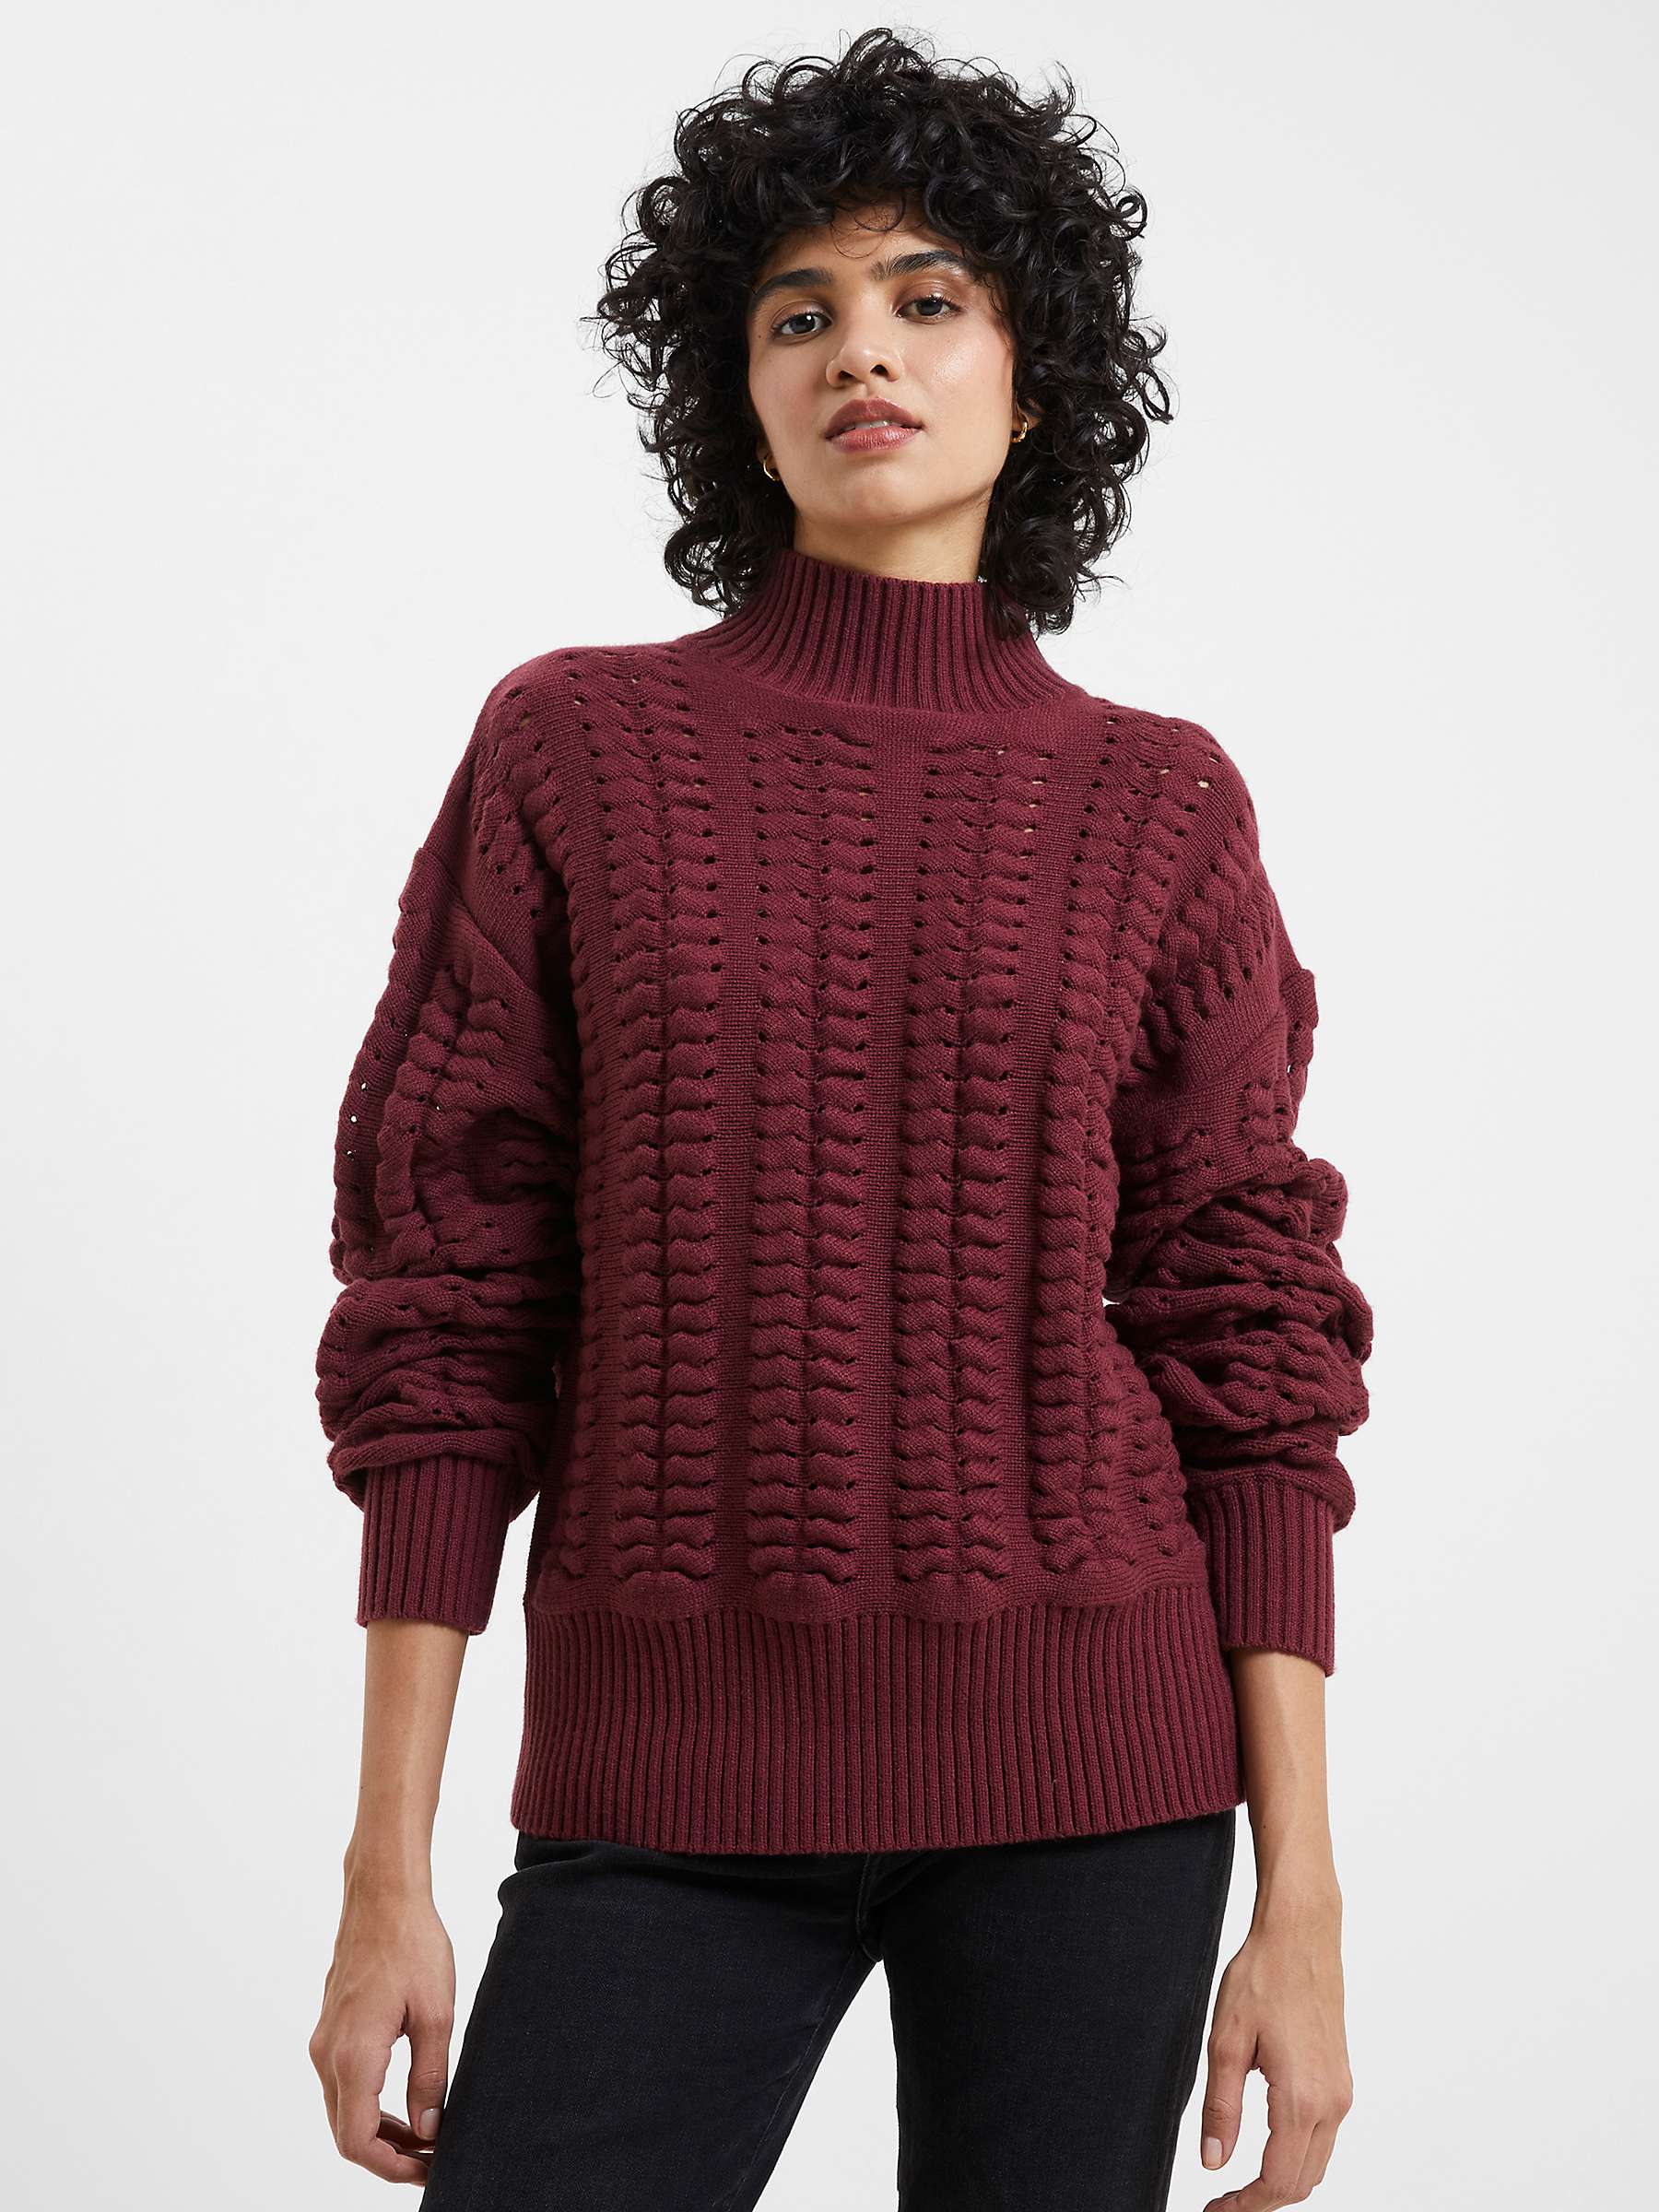 Buy French Connection Jolee Jumper, Chocolate Truffle Online at johnlewis.com